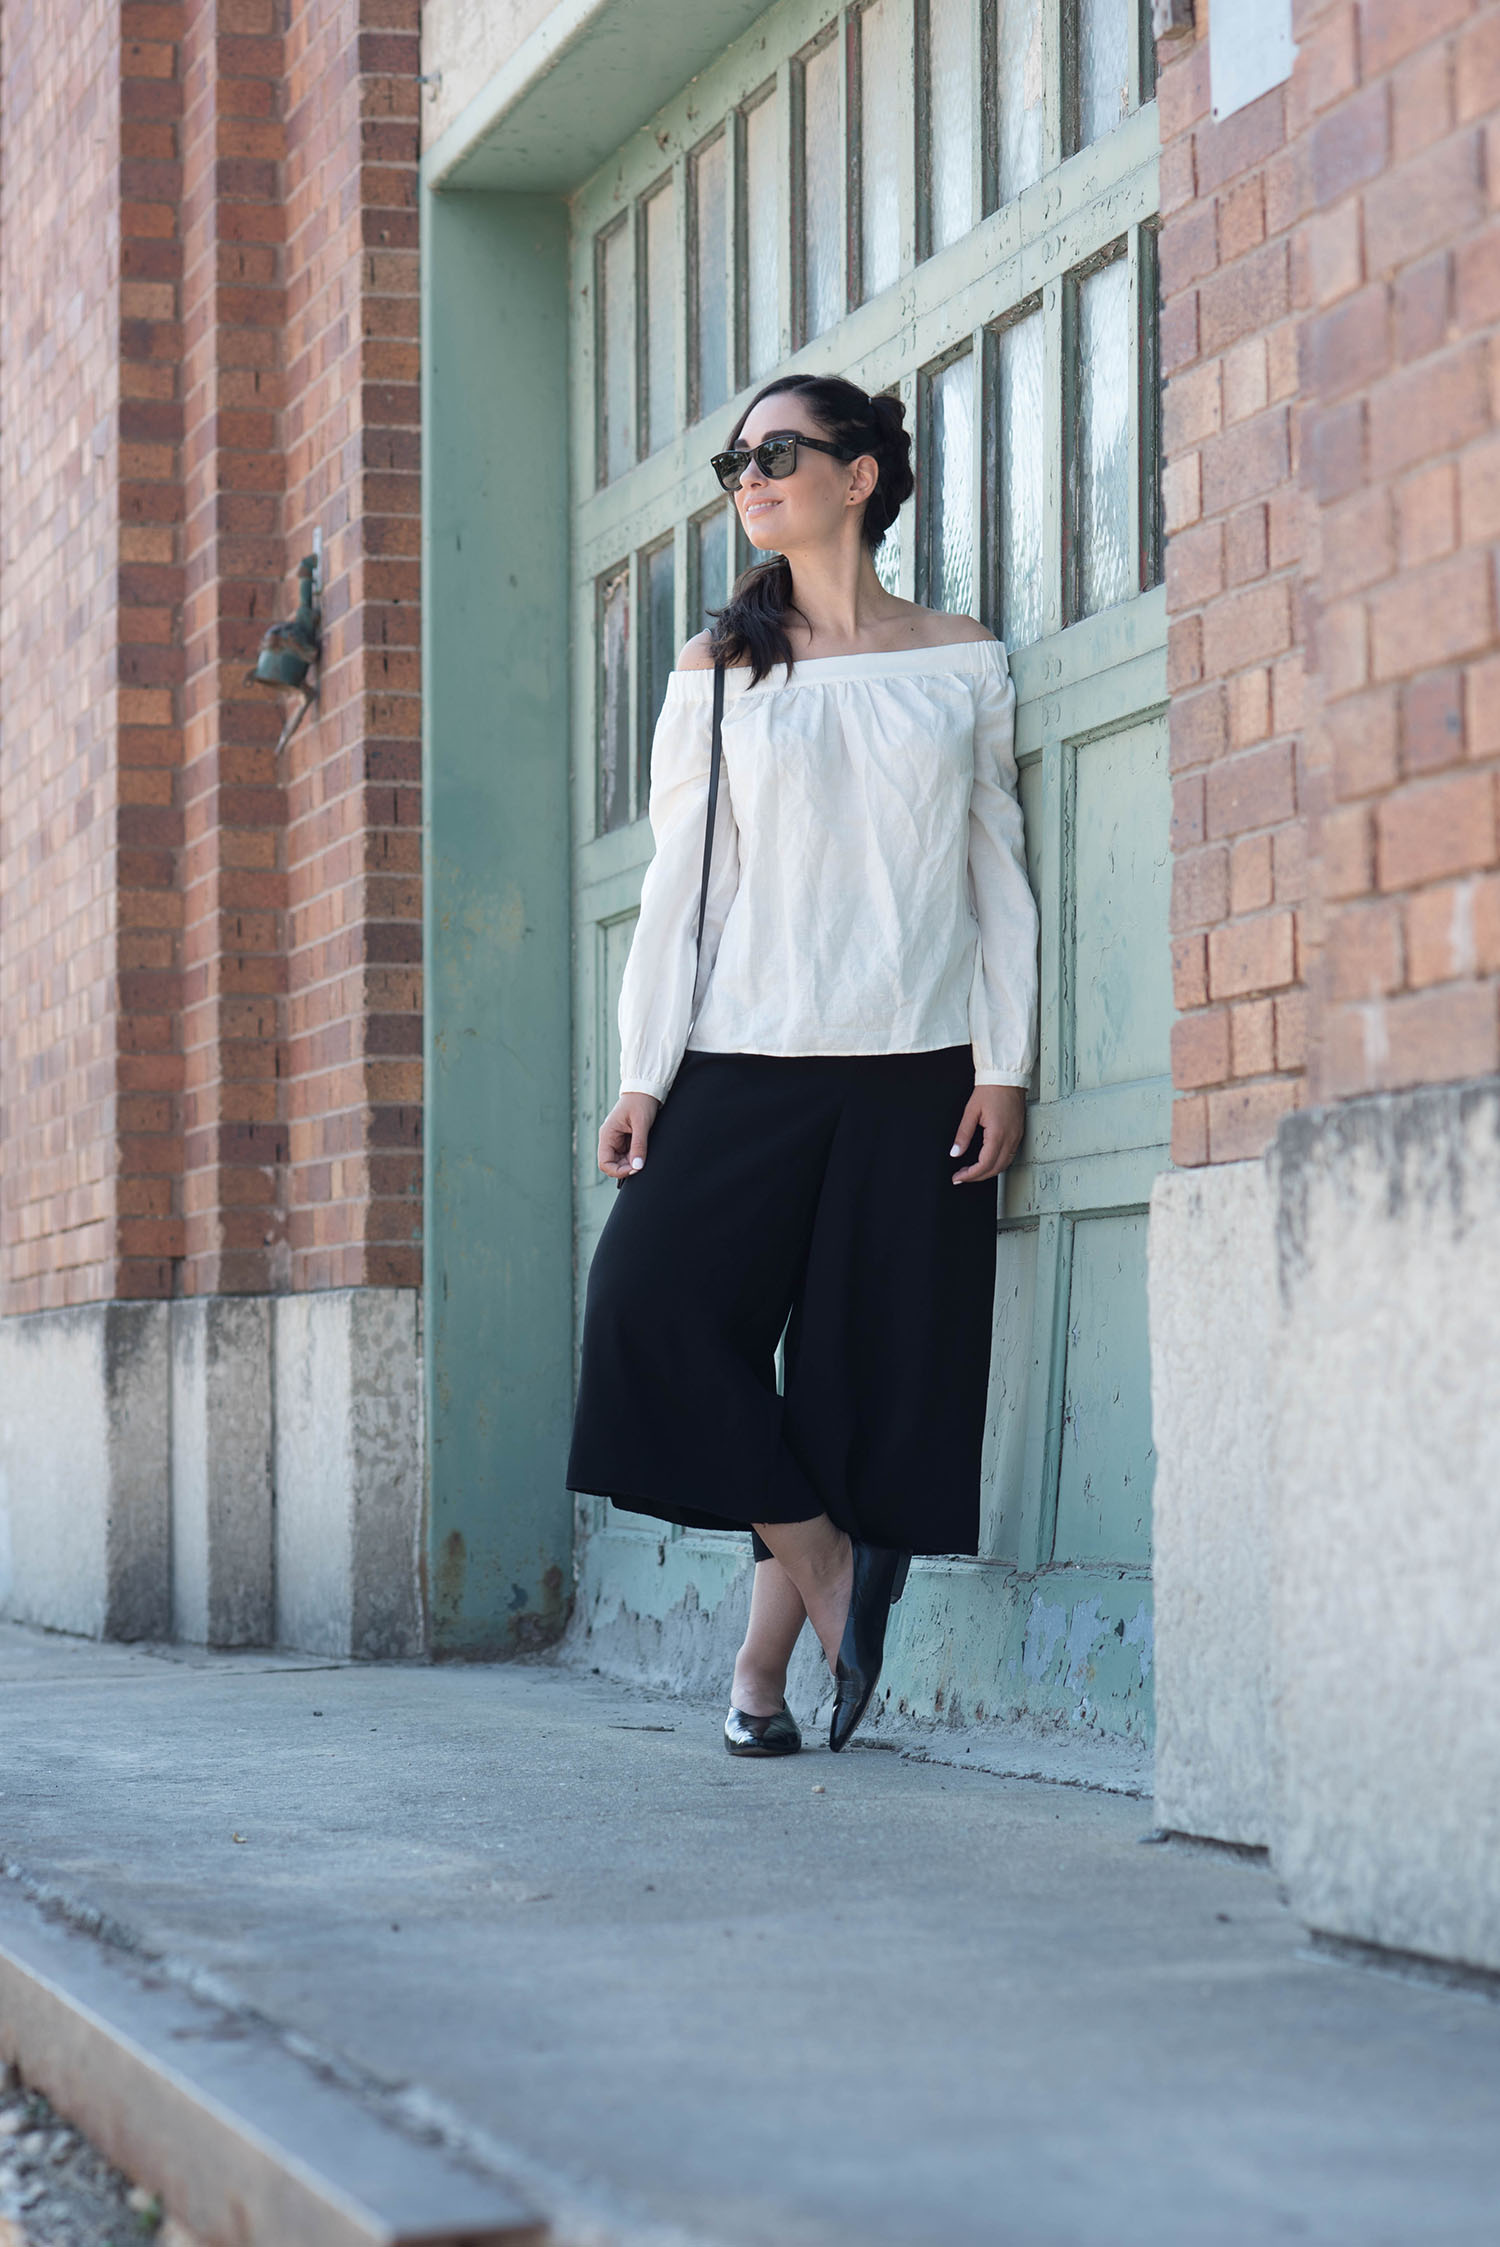 Fashion blogger Cee Fardoe of Coco & Vera wears a braid by Fran Rizzutto with Aritzia culottes and white off-shoulder blouse